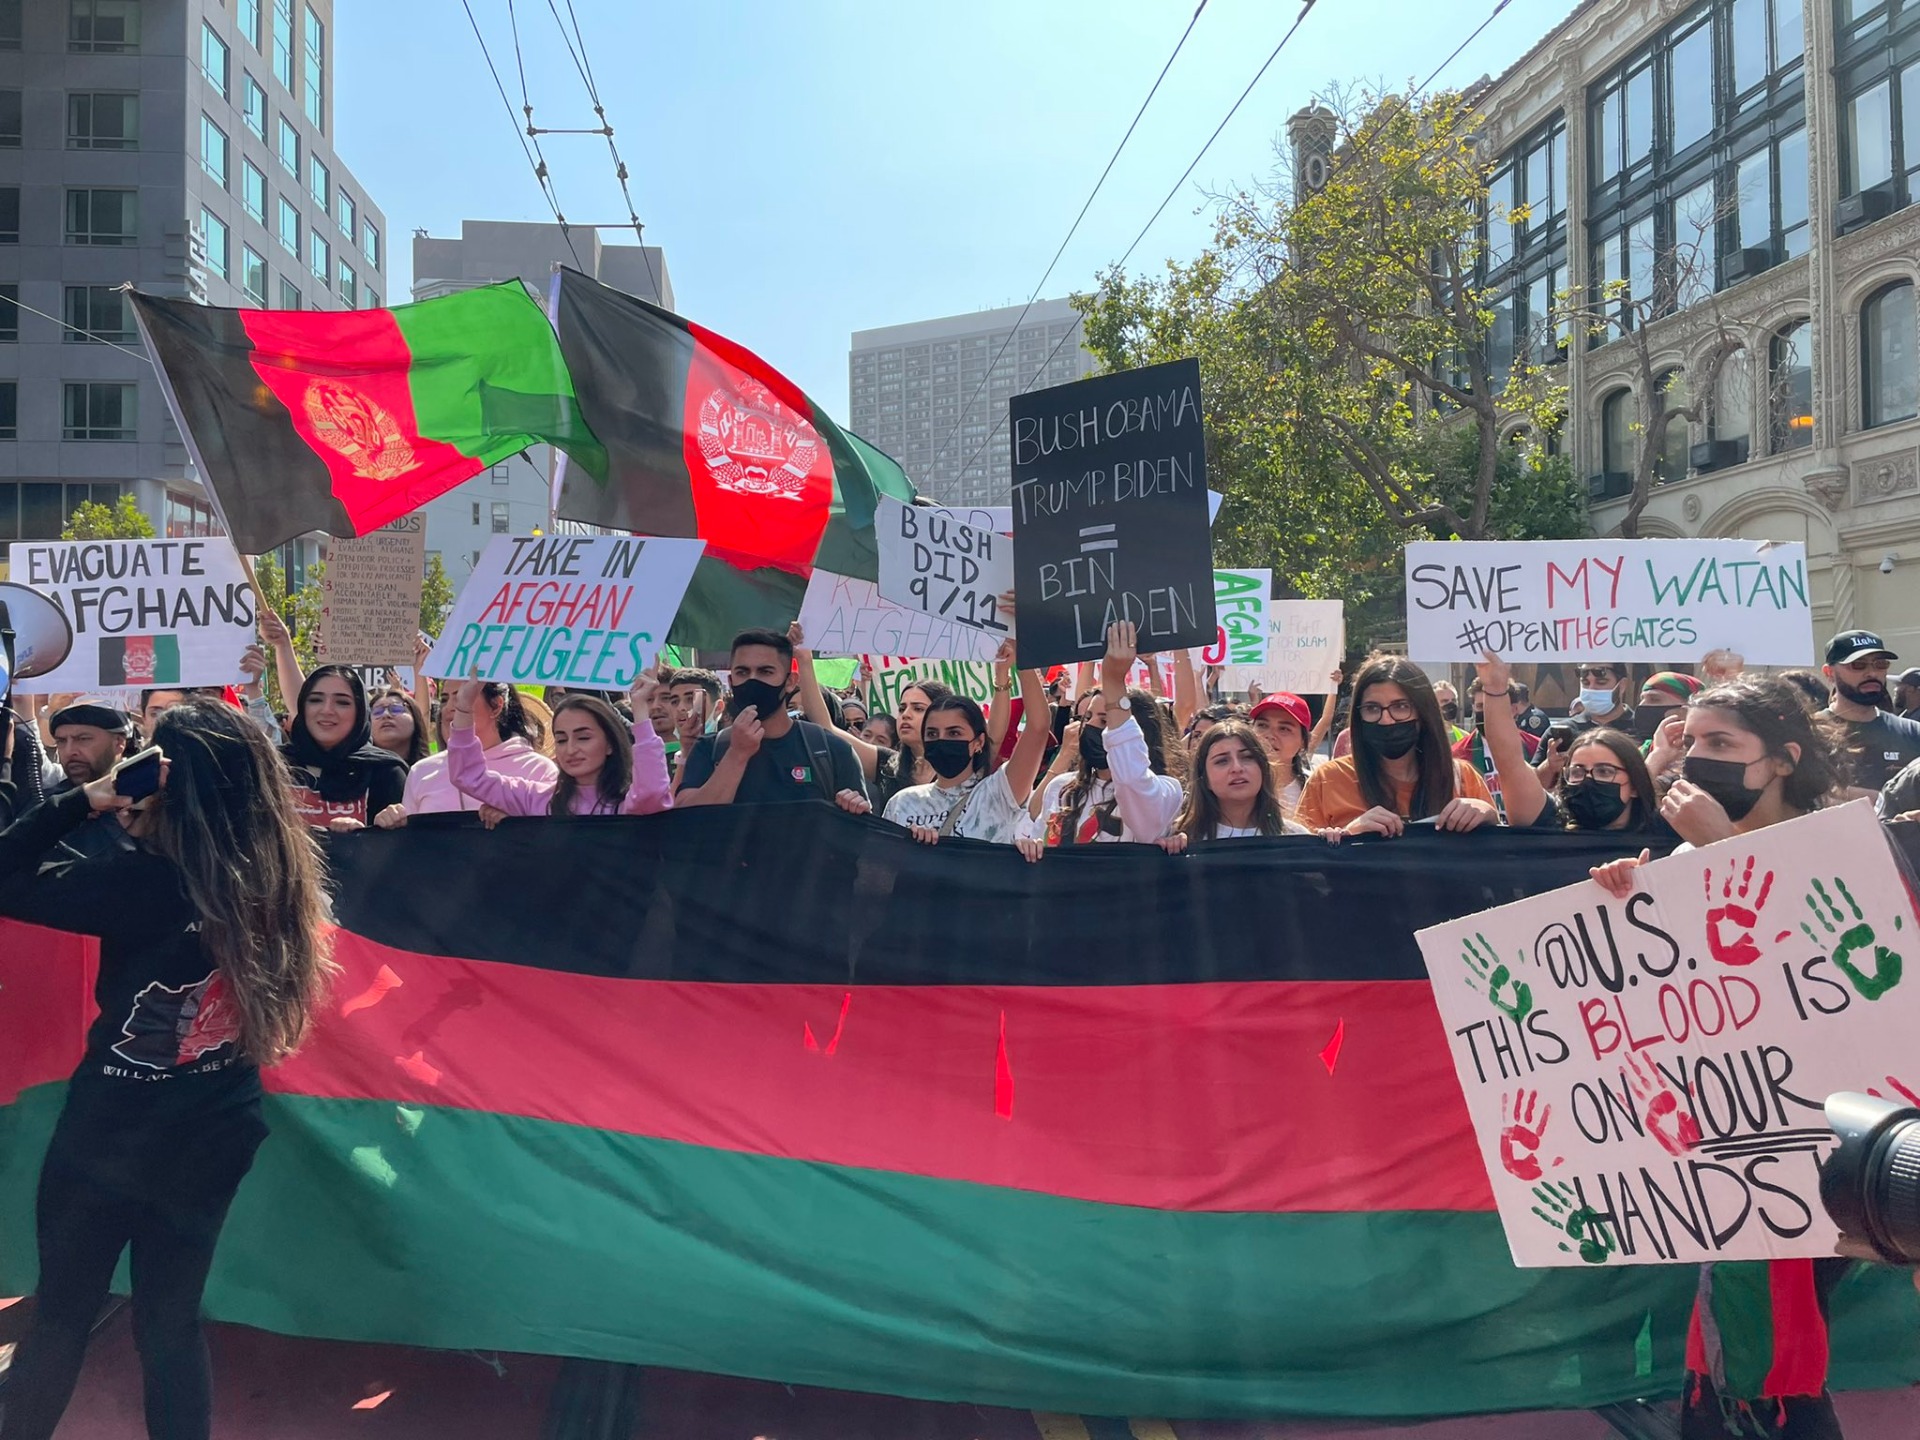 A crowd marching with a long black, red, and green Afghan flag across them, amid protest signs and other Afghan flags